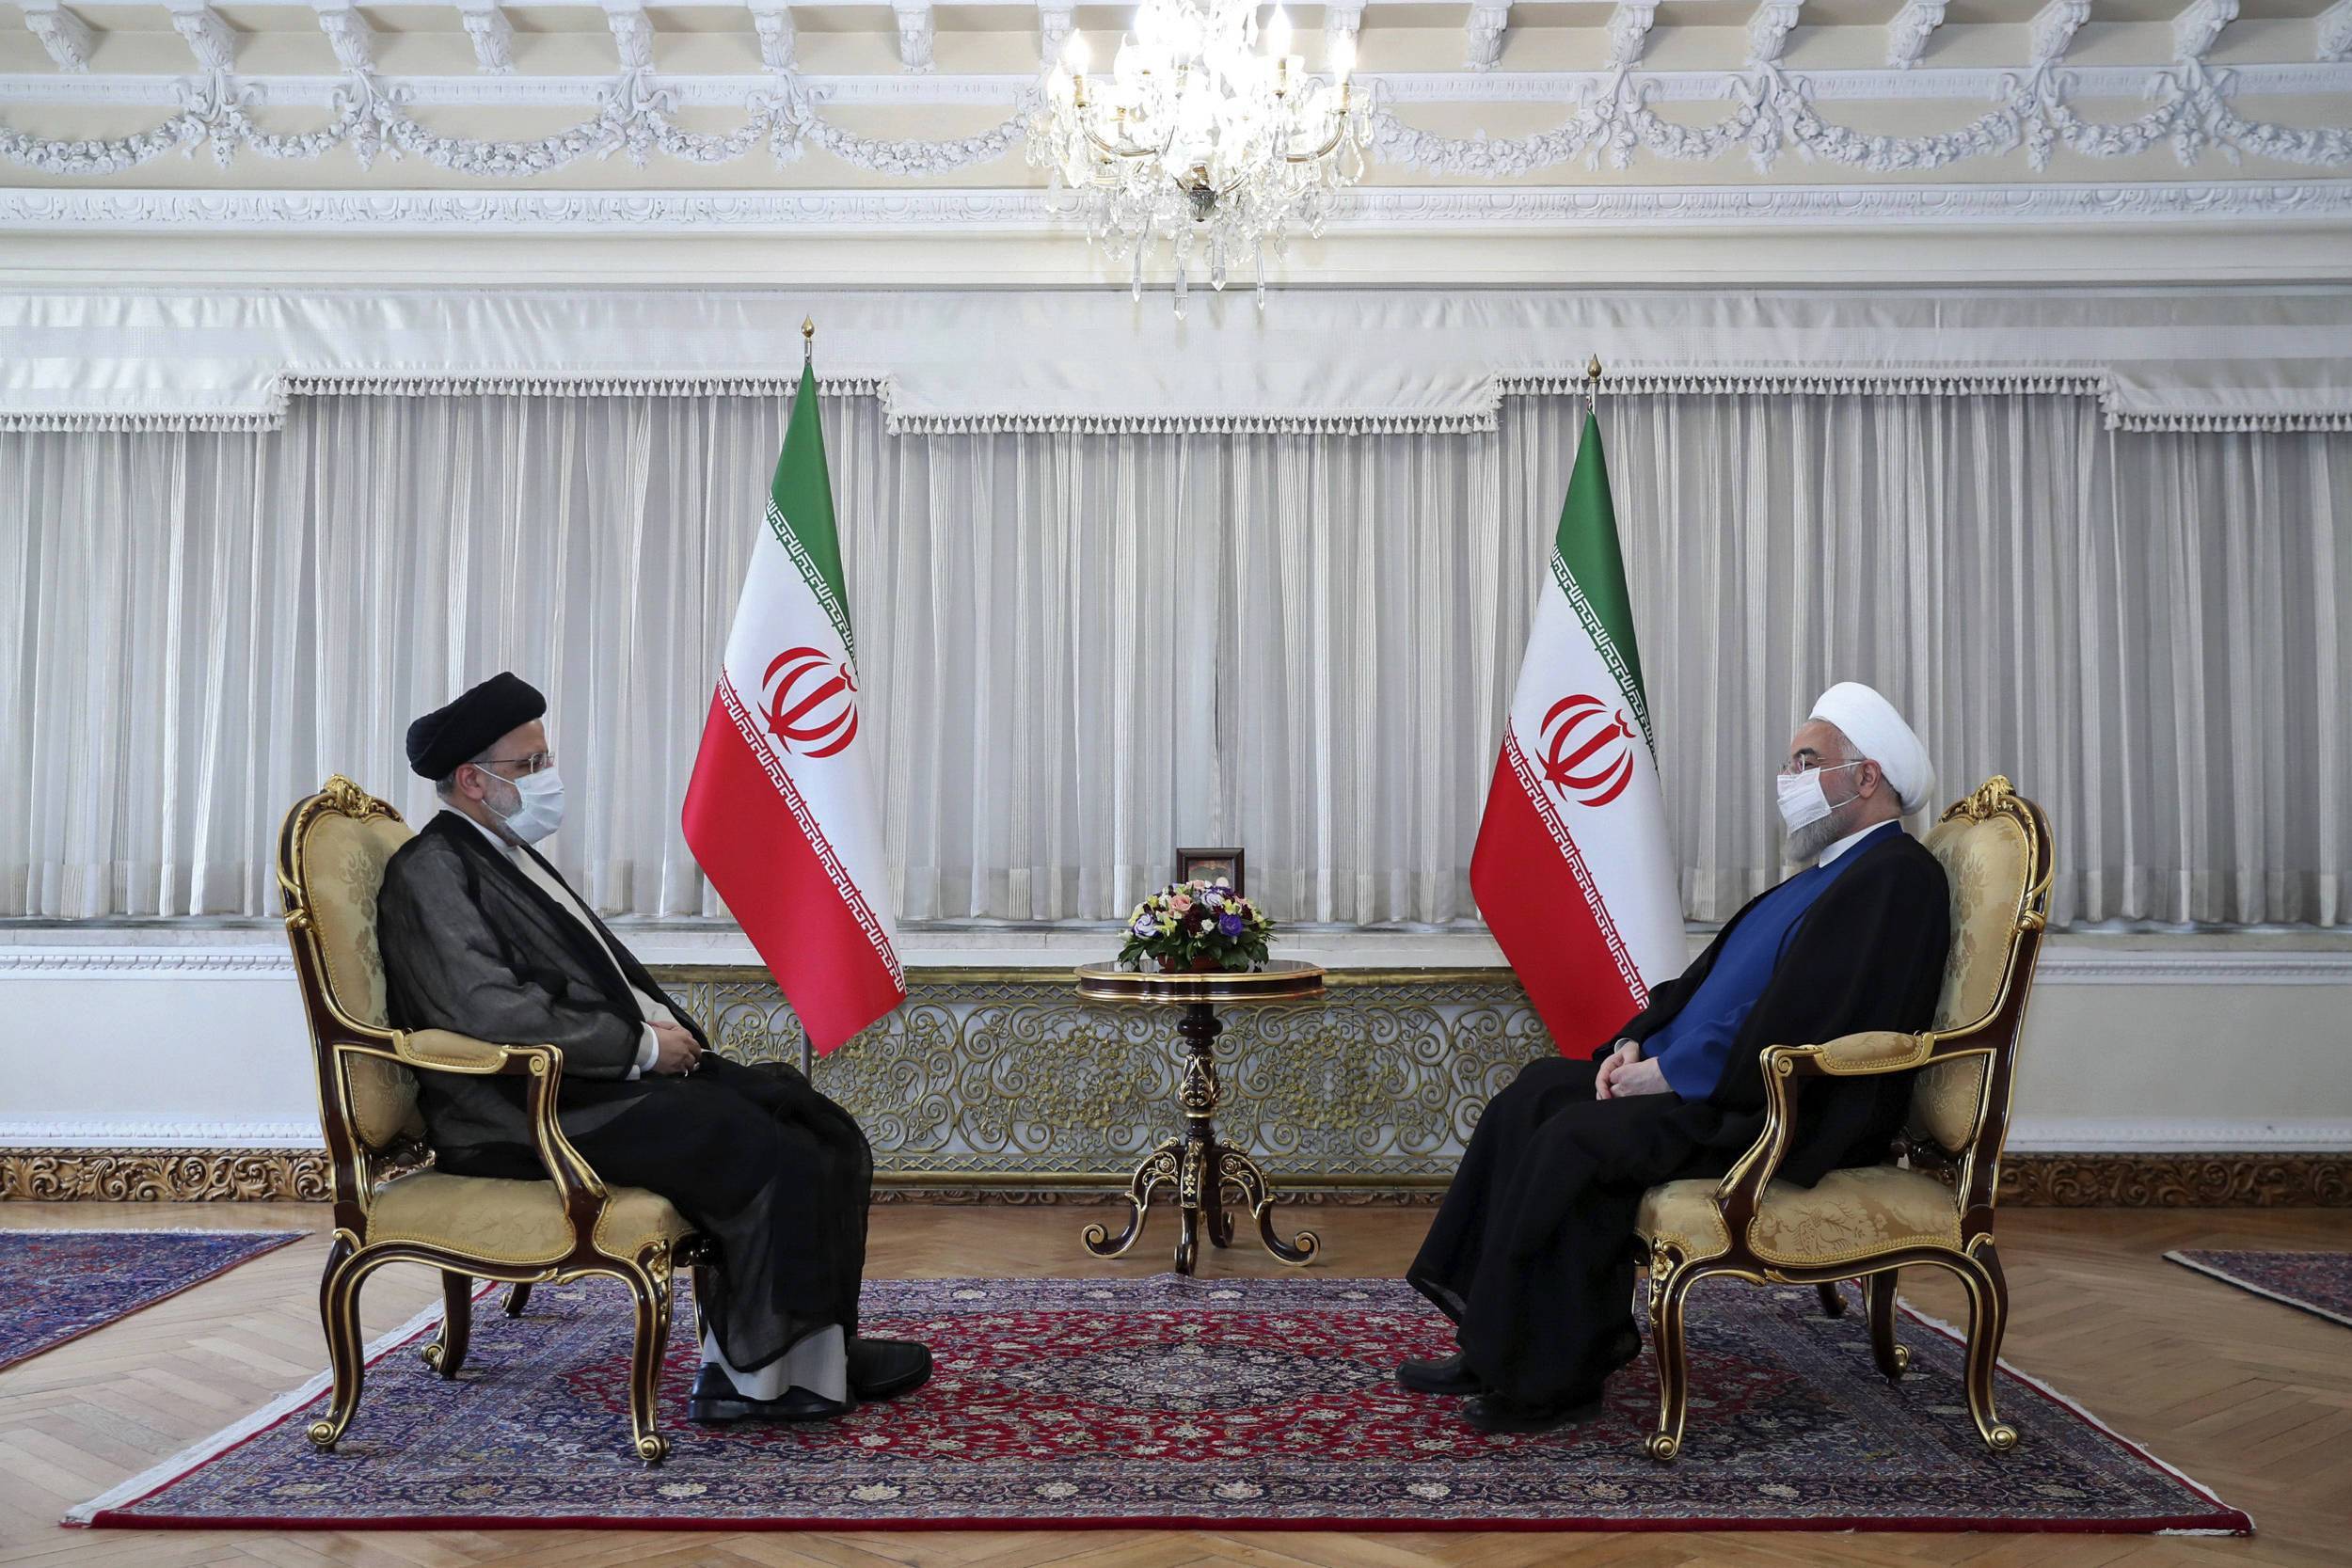 In this photo released by the official website of the office of the Iranian Presidency, President Hassan Rouhani, right, and President-elect Ebrahim Raisi, who is the current judiciary chief, talk during their meeting in Tehran, Iran, Wednesday, June 23, 2021. (Iranian Presidency Office via AP)/ENO102/21174466178733/AP MANDATORY CREDIT./2106231508